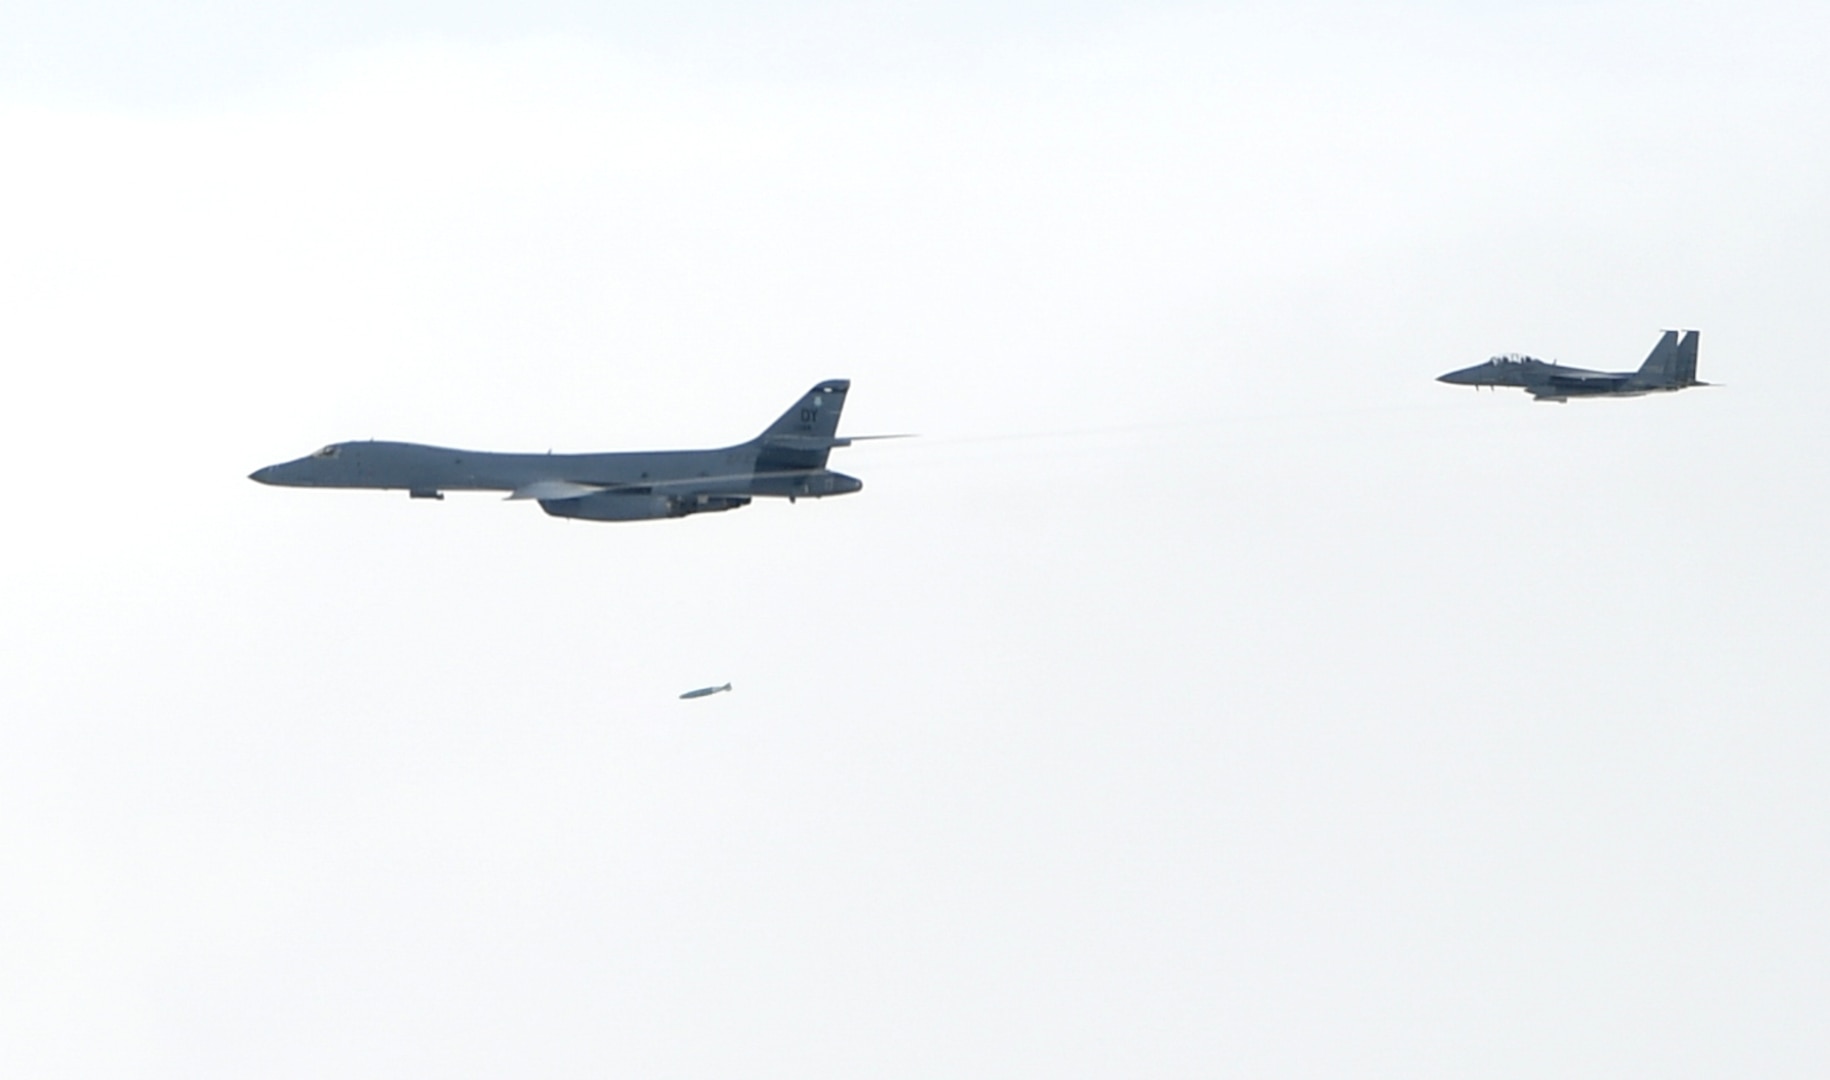 A U.S. Air Force B-1B Lancers assigned to the 9th Expeditionary Bomb Squadron, deployed from Dyess Air Force Base, Texas, fly with a South Korean F-15 fighter jet over the Korean Peninsula, July 7. The Lancers departed Andersen Air Force Base, Guam to conduct a sequenced bilateral mission with South Korean F-15s and Koku Jieitai (Japan Air Self-Defense Force) F-2 fighter jets. The mission is in response to a series of increasingly escalatory action by North Korea, including a launch of an intercontinental ballistic missile (ICBM) on July 3. (photo courtesy of Republic of Korea air force)